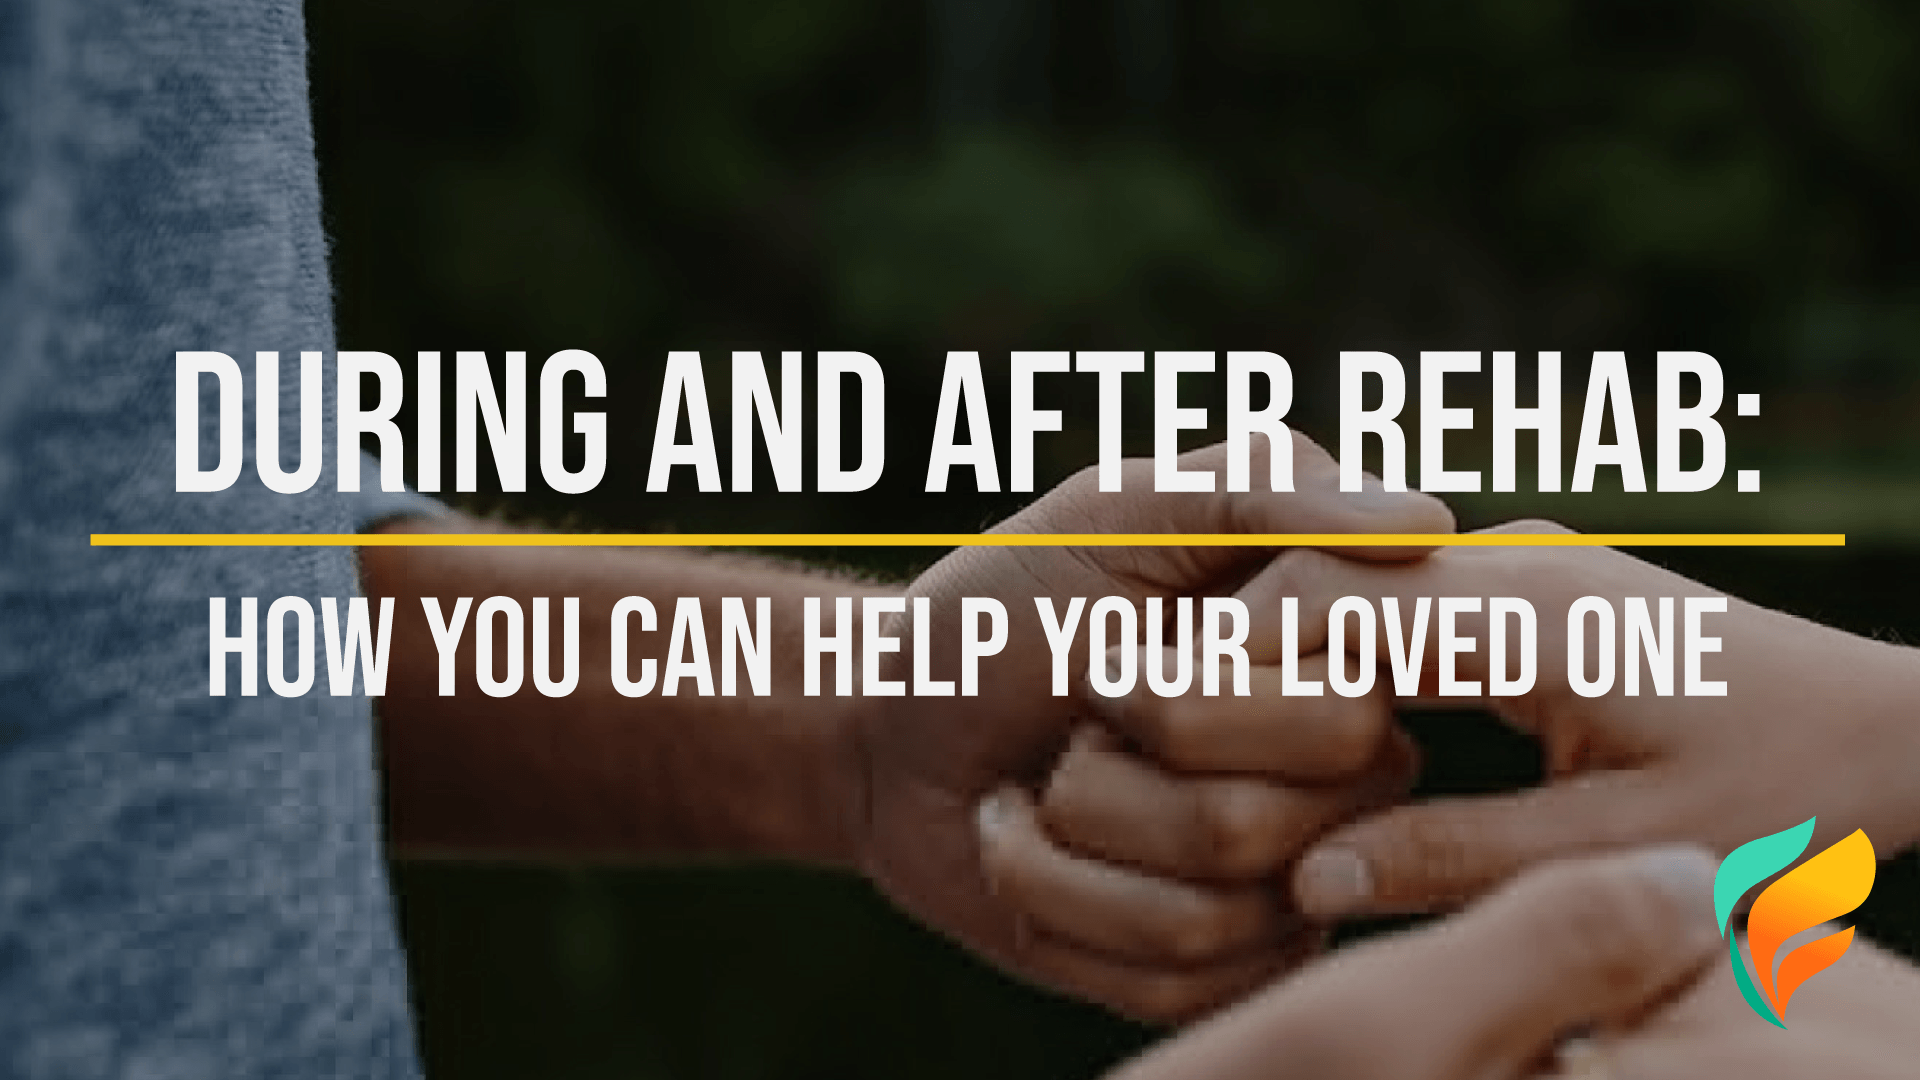 During and After Rehab: How You Can Help